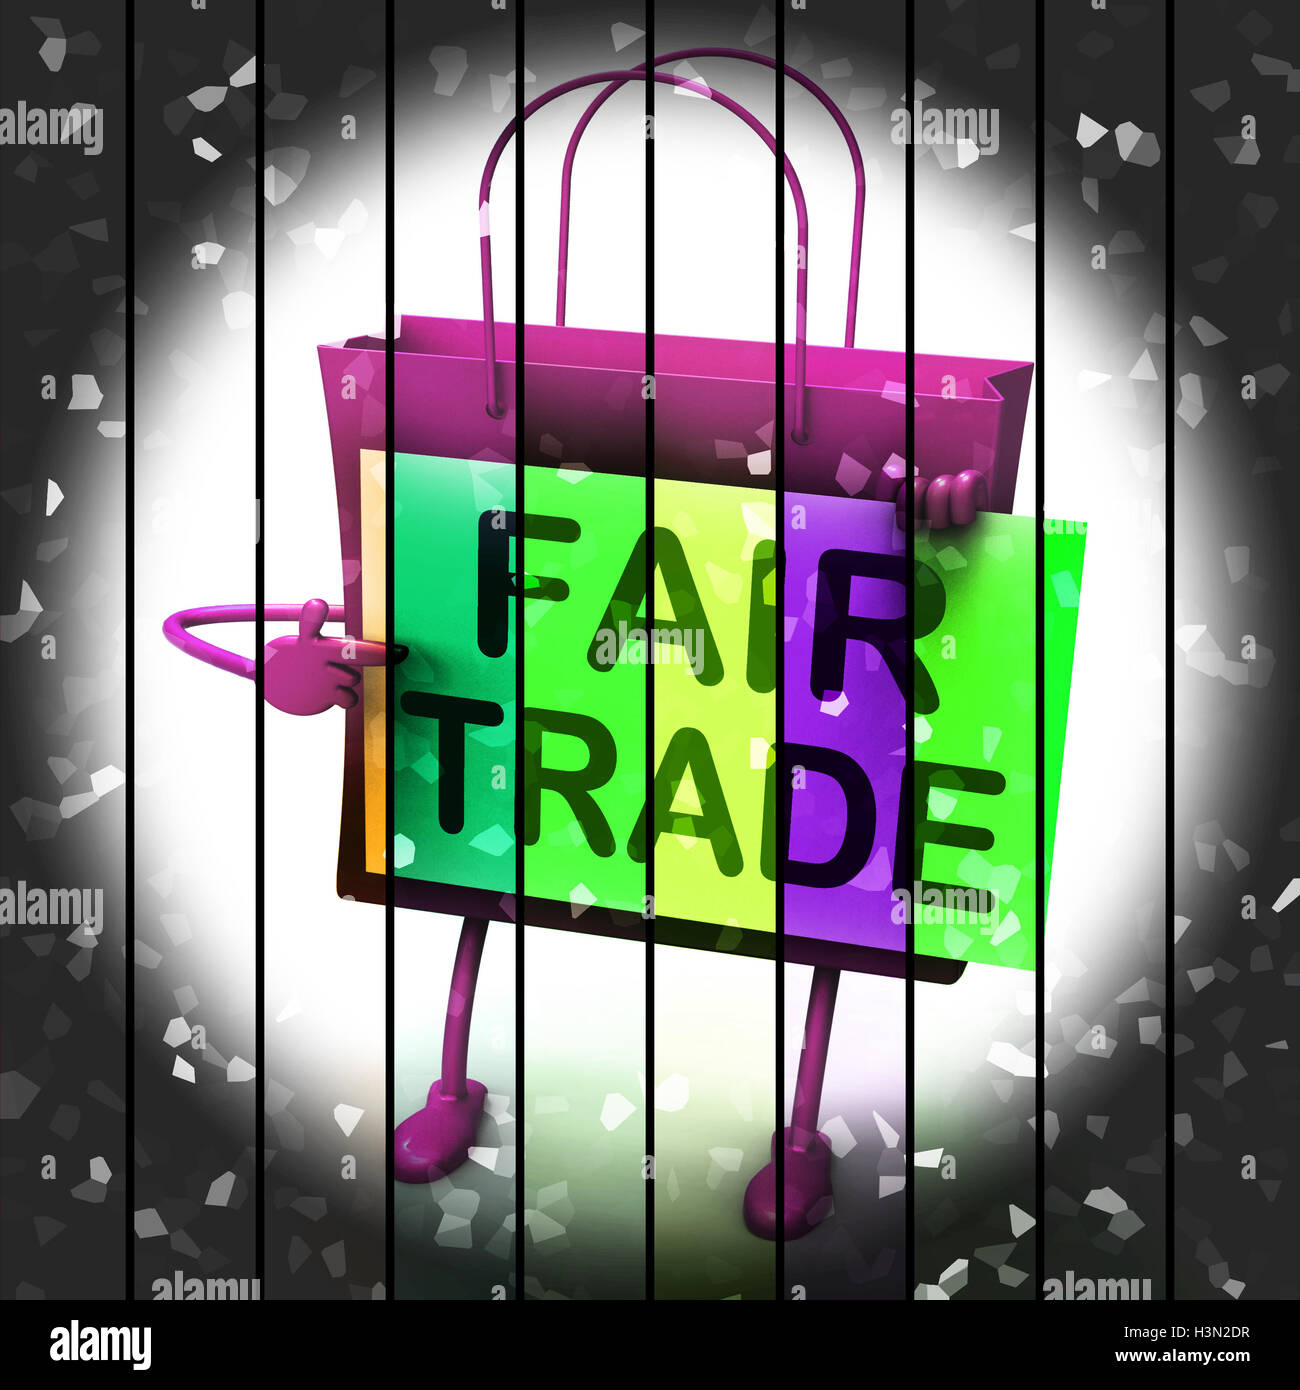 Fair Trade Shopping Bag Represents Equal Deals and Exchange Stock Photo